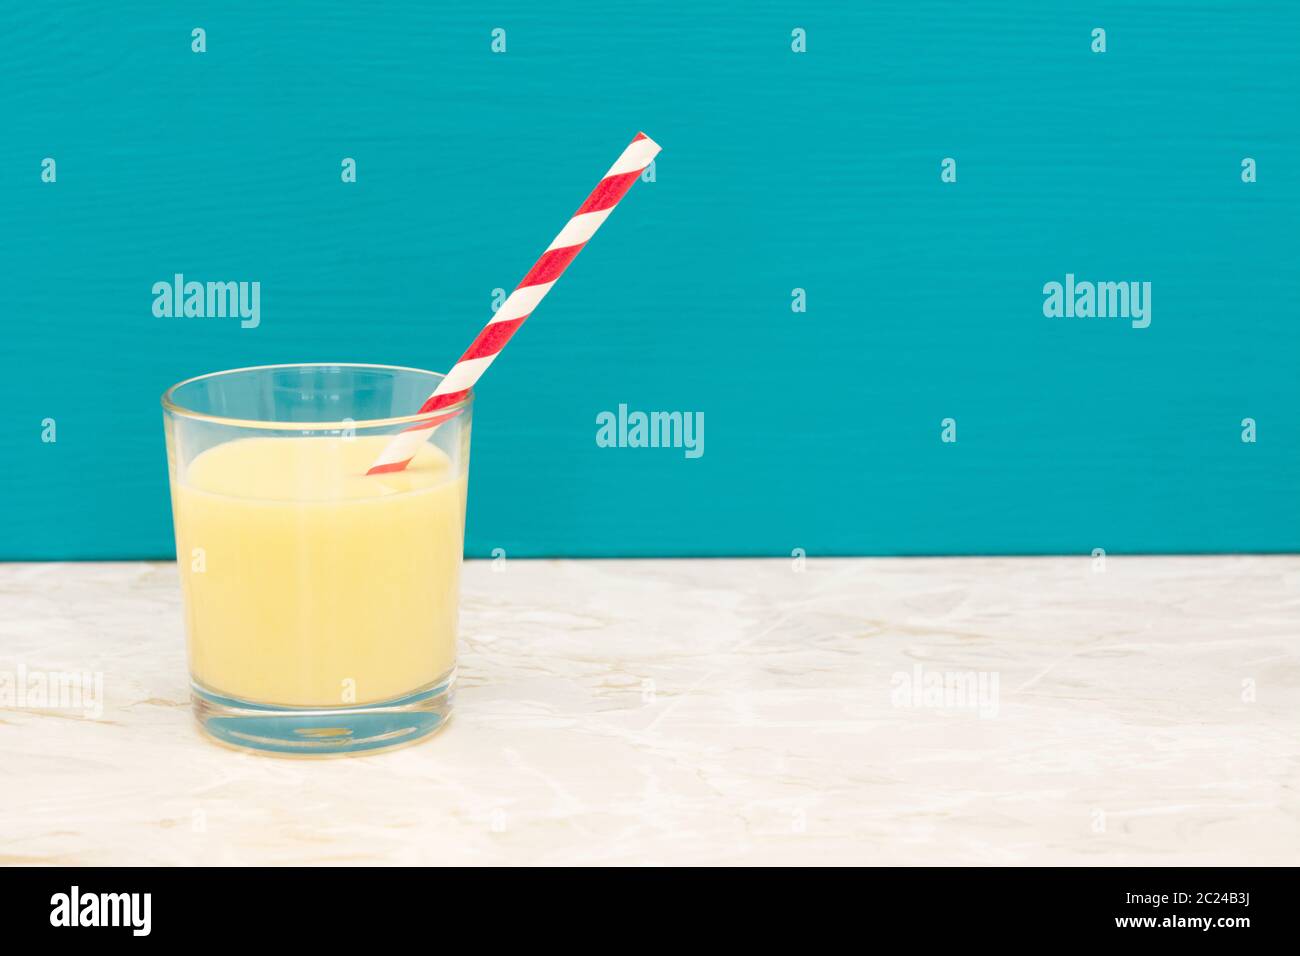 https://c8.alamy.com/comp/2C24B3J/tasty-banana-milkshake-with-a-retro-paper-straw-in-a-glass-tumbler-with-a-teal-background-and-copy-space-2C24B3J.jpg